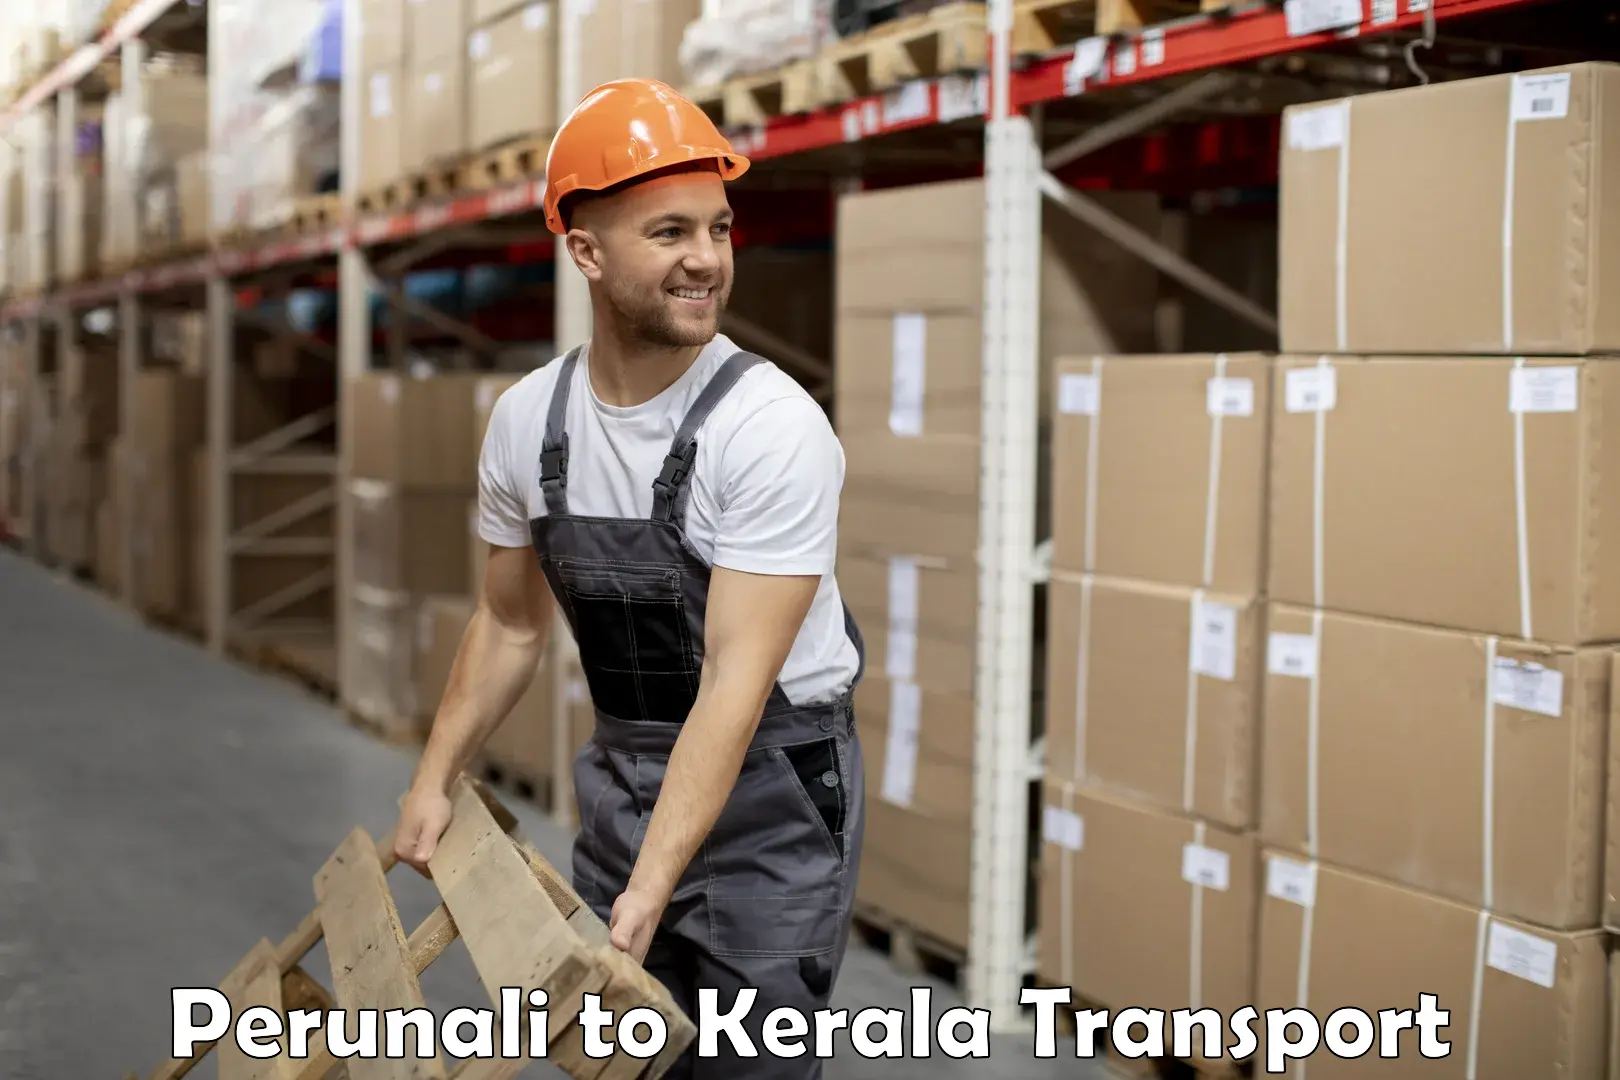 Express transport services in Perunali to Puthukkad